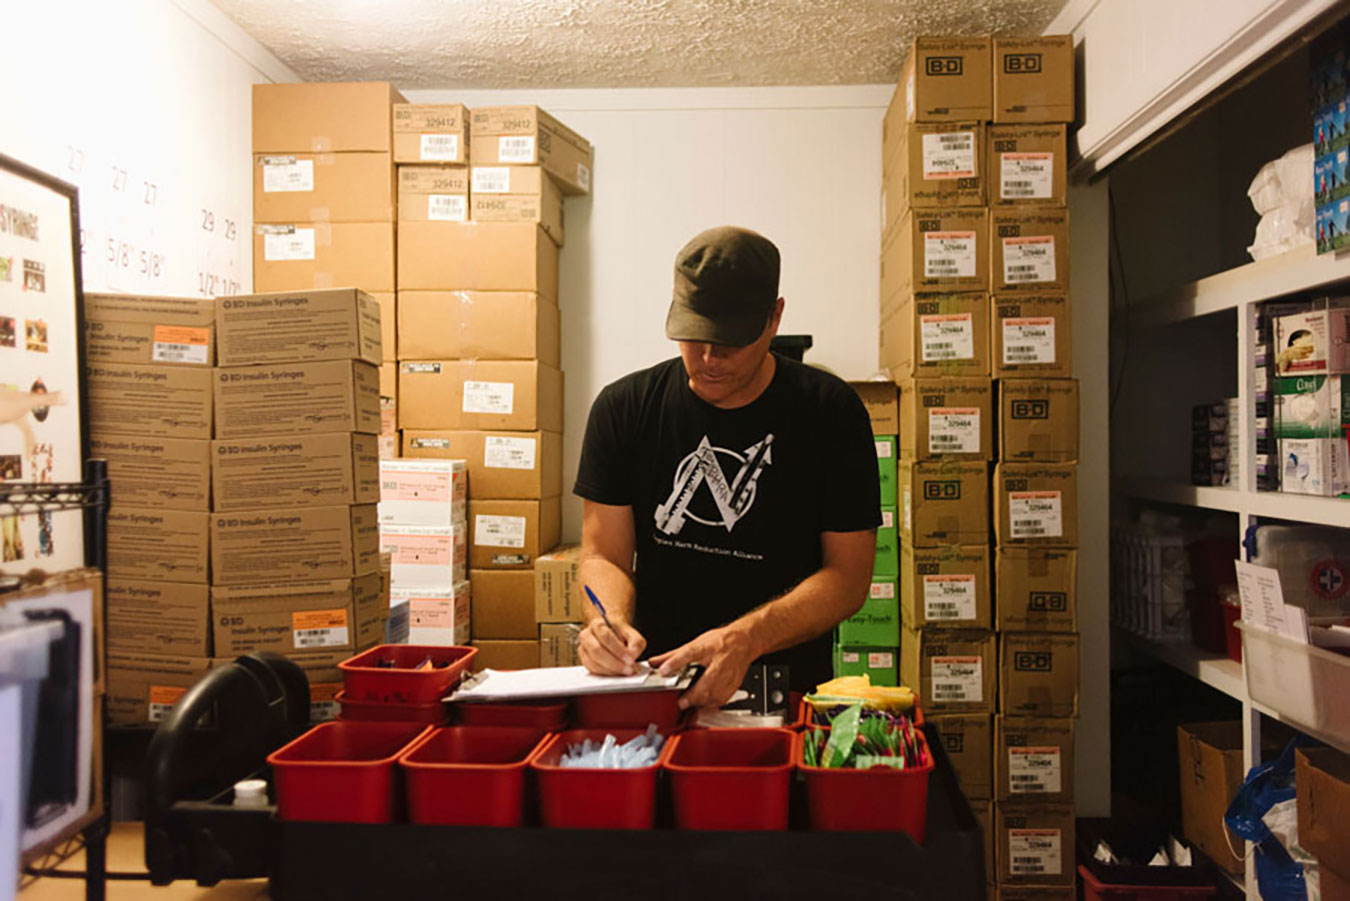 Abert at work in the IRA store room. An IRA participant, Cindy, says she has received more solutions at IRA than from anywhere else. | Photo by Natasha Komoda